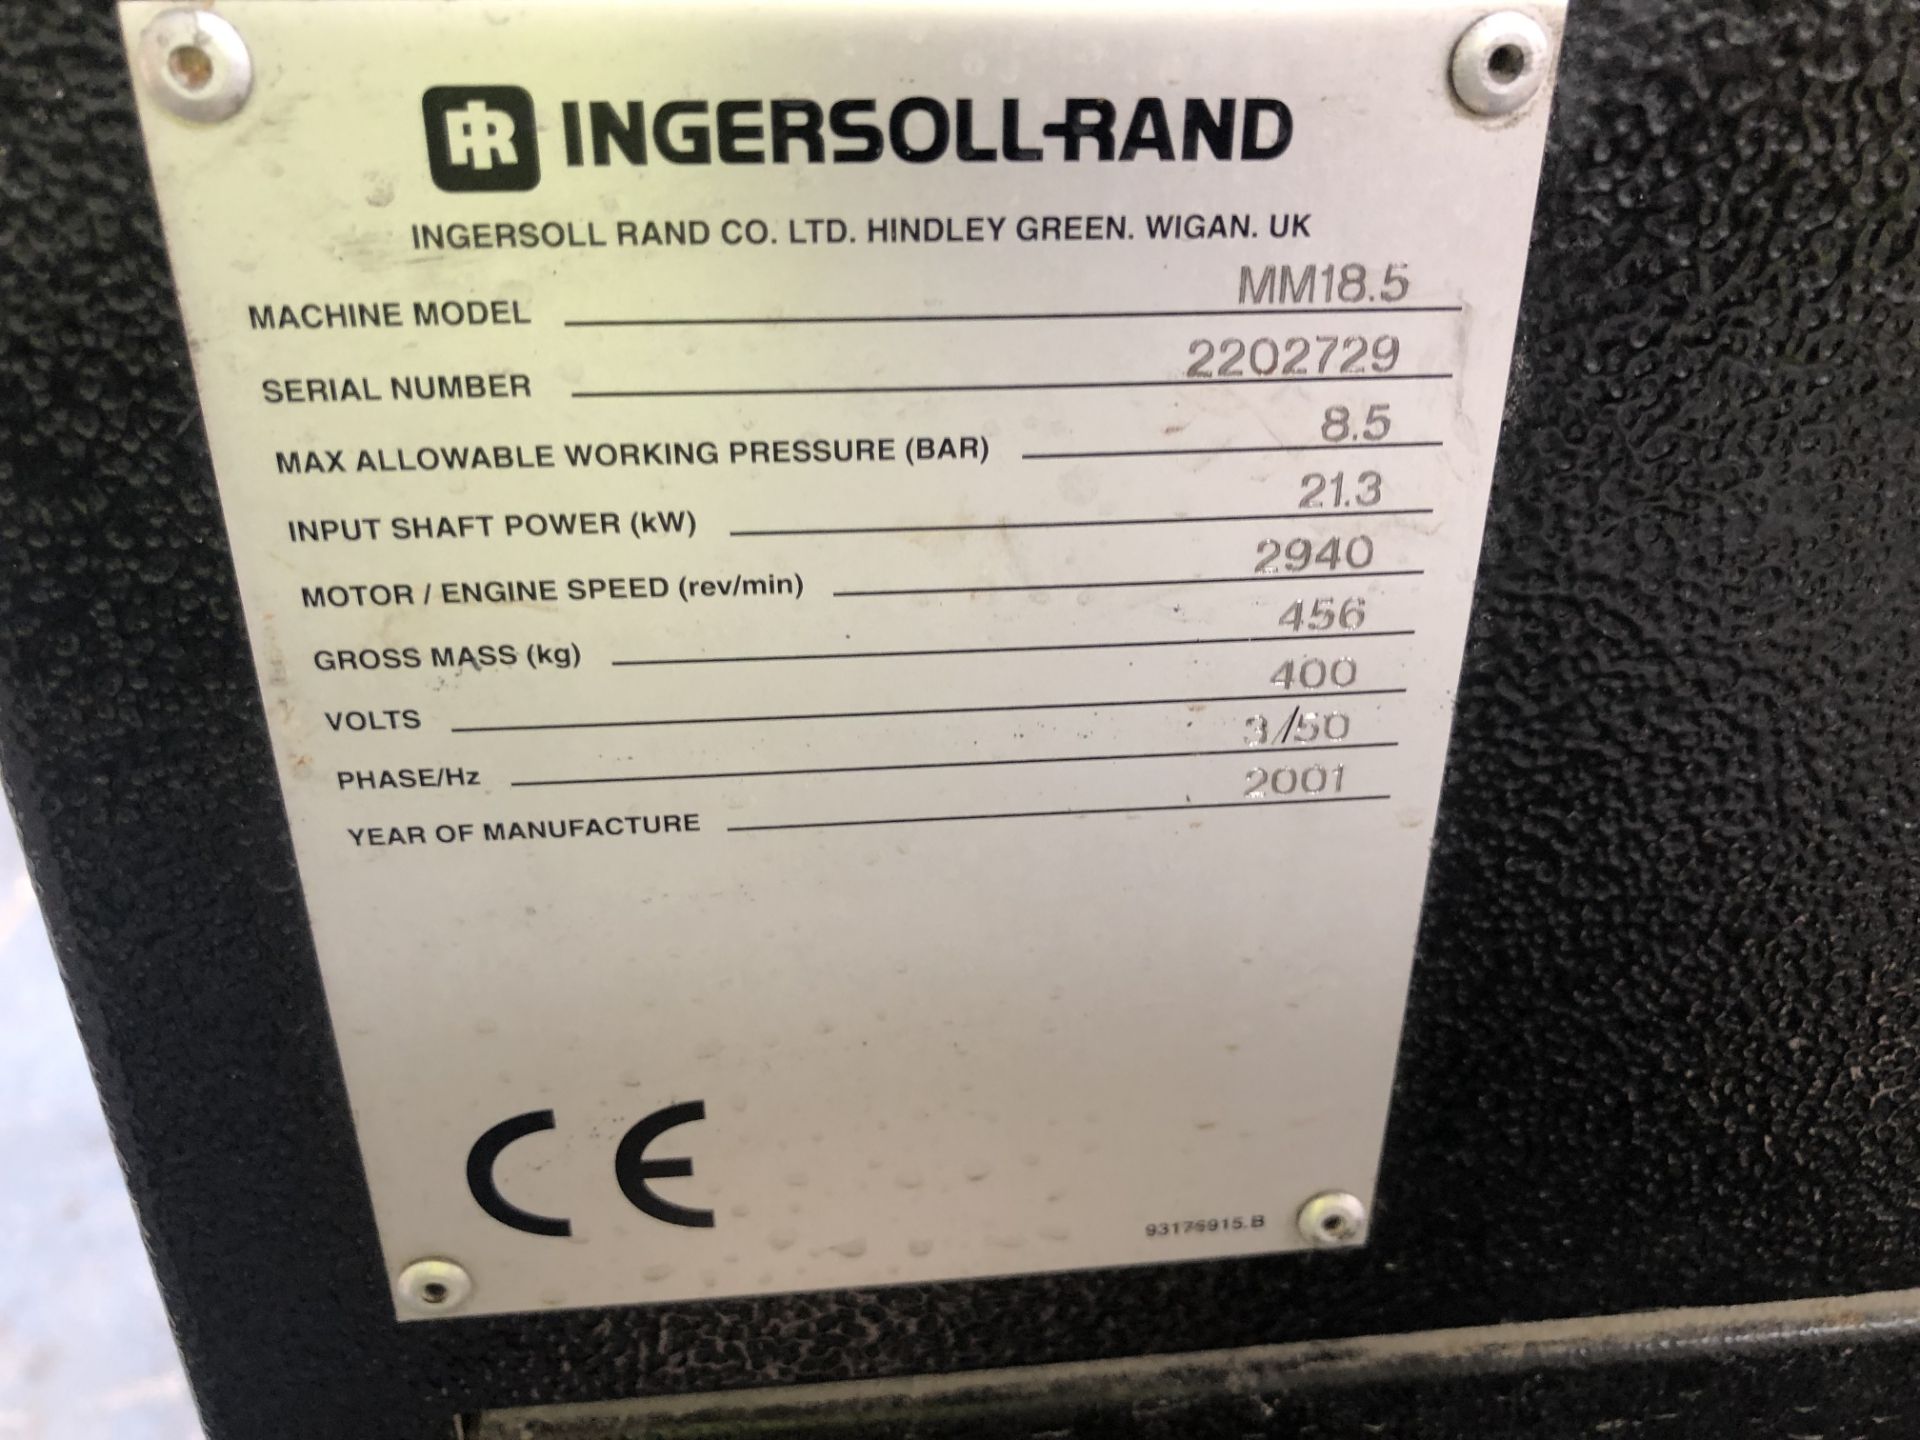 Ingersoll Rand SSR MM18.5 Dryer, serial no. 220272 - Image 2 of 3